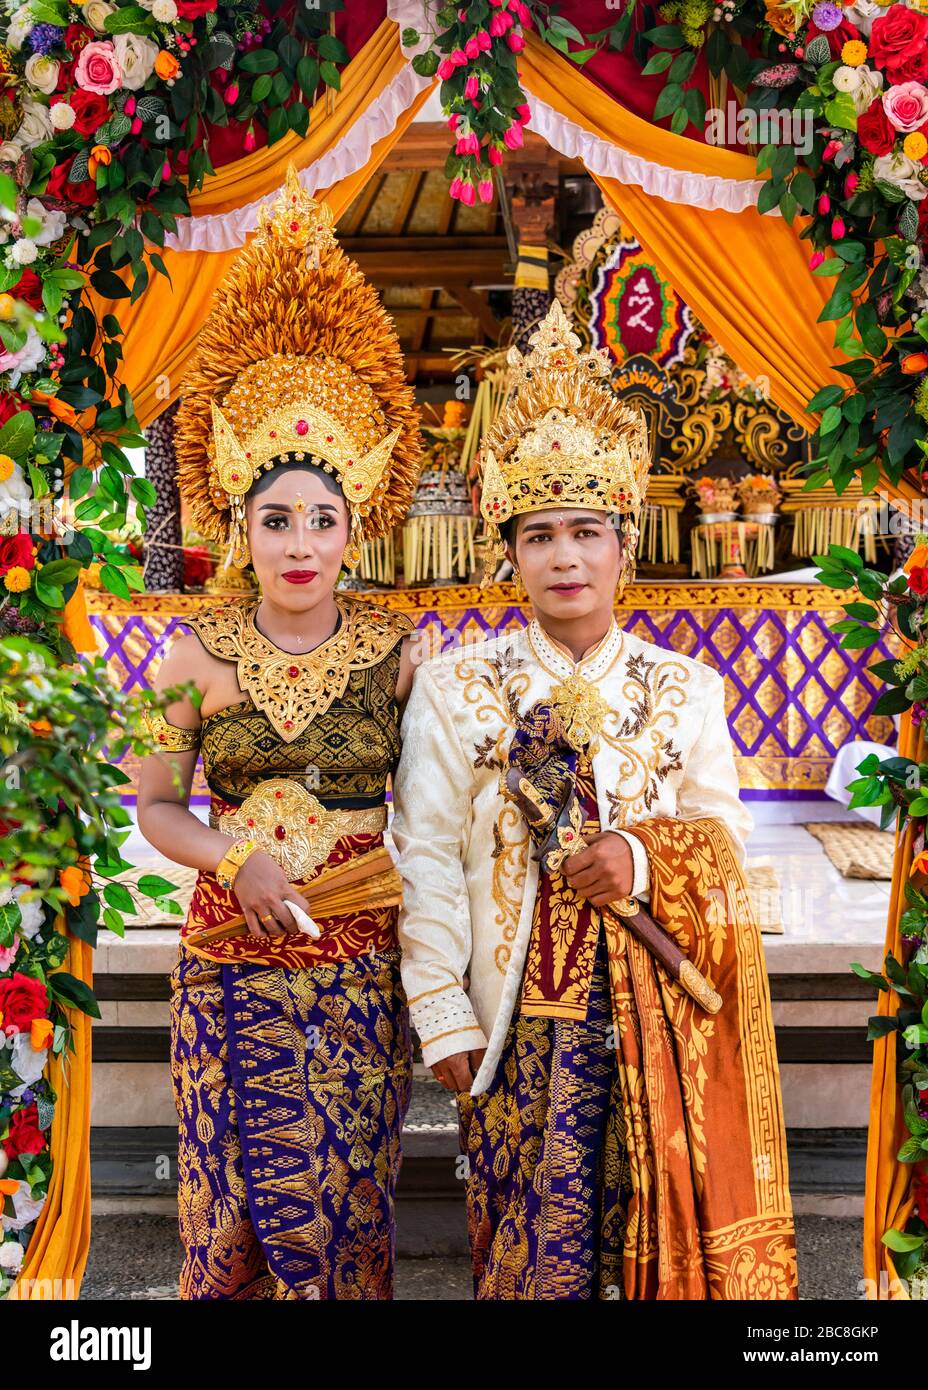 Vertical portrait of the bride and groom at a Balinese wedding, Indonesia. Stock Photo